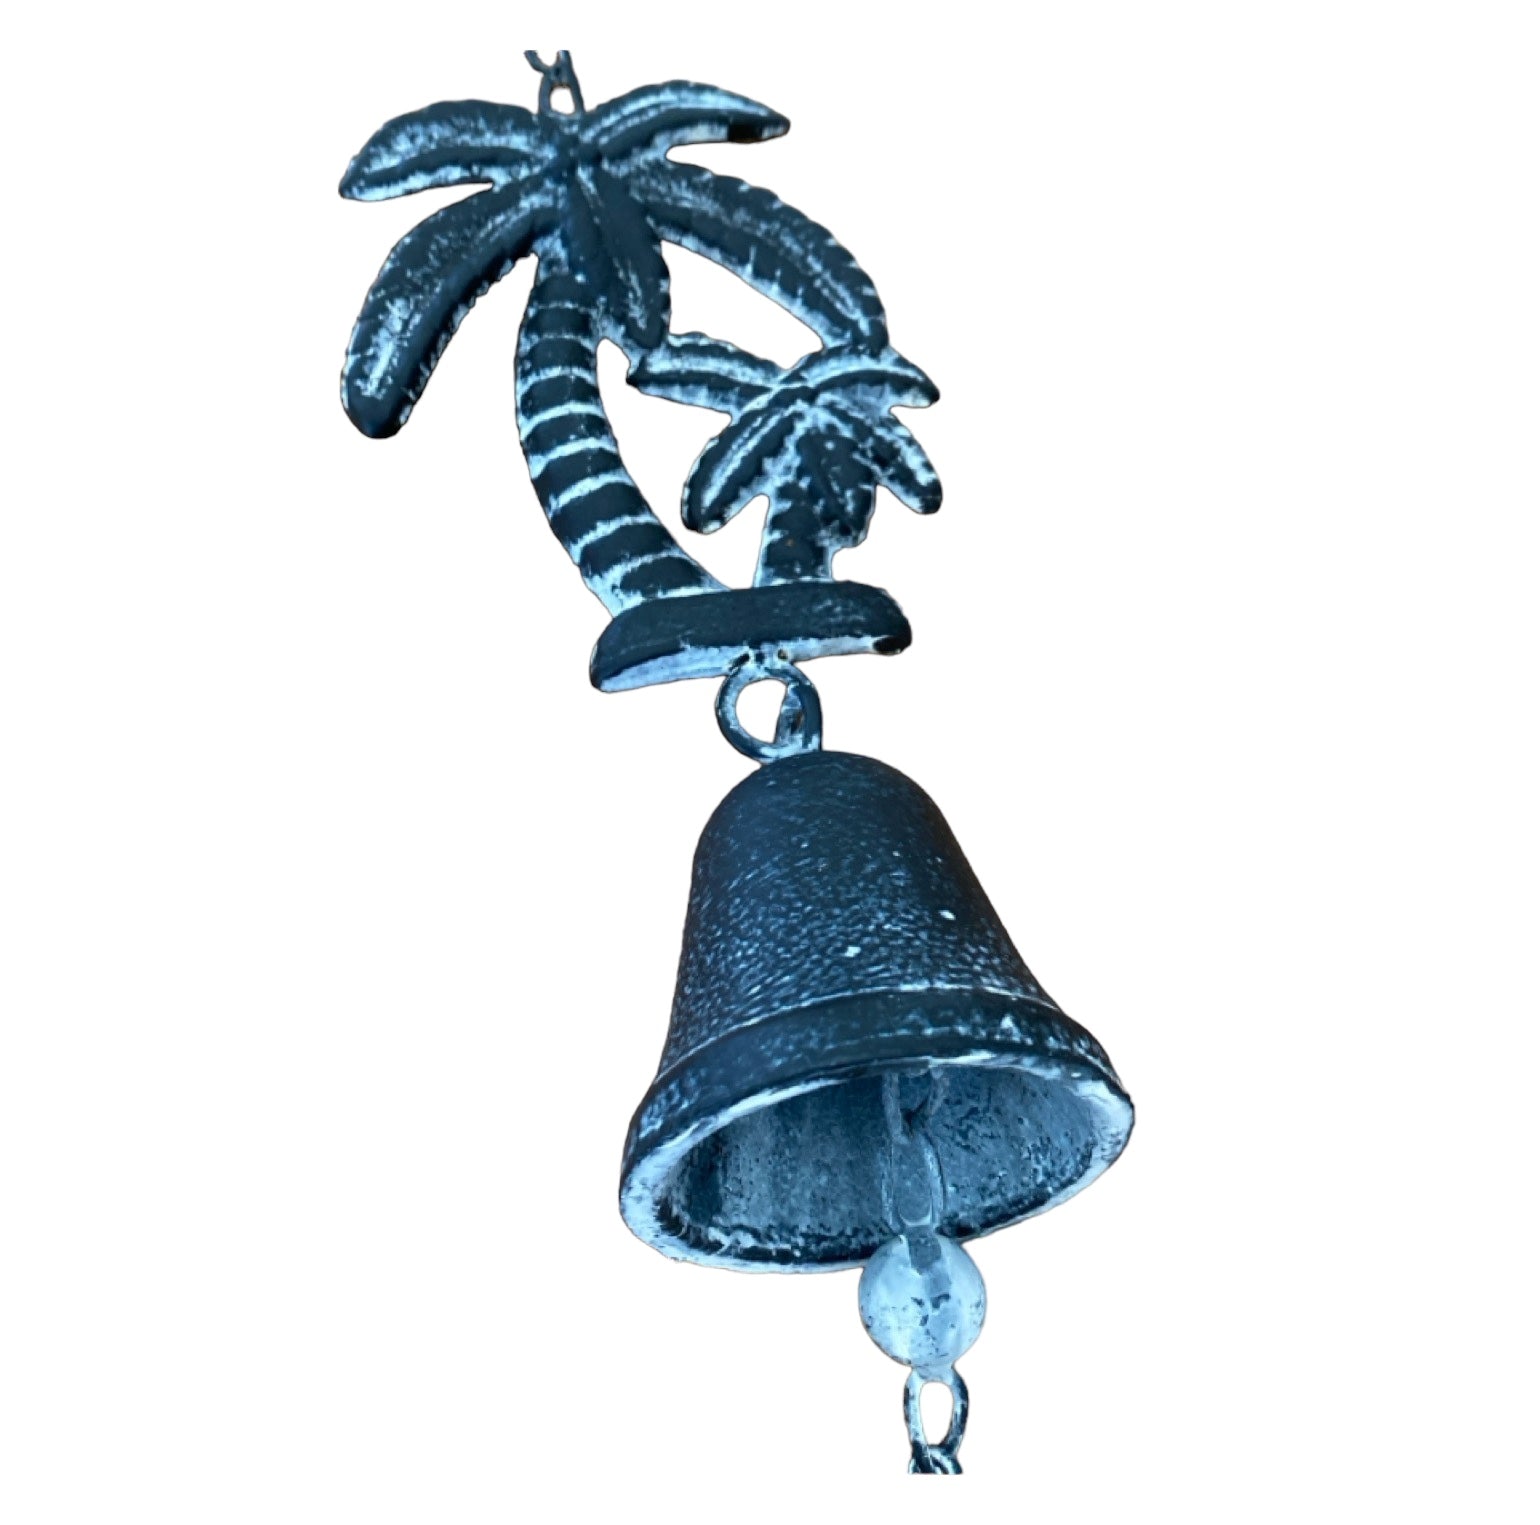 Palm Tree Door Bell Cast Iron - The Renmy Store Homewares & Gifts 